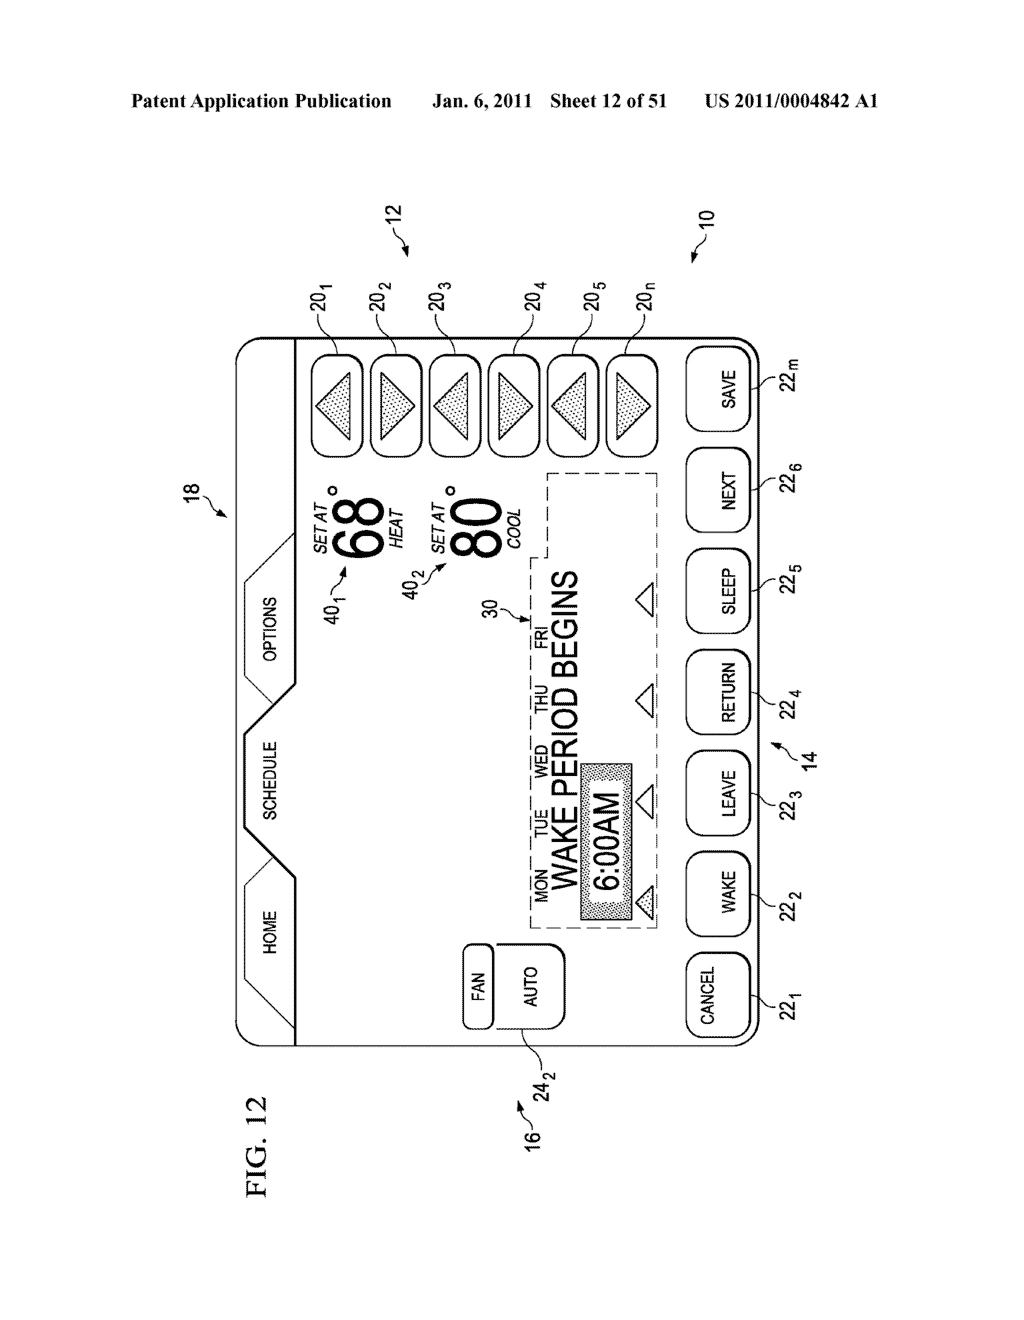 DISPLAY APPARATUS AND METHOD HAVING CUSTOM REMINDER ENTRY CAPABILITY FOR AN ENVIRONMENTAL CONTROL SYSTEM - diagram, schematic, and image 13